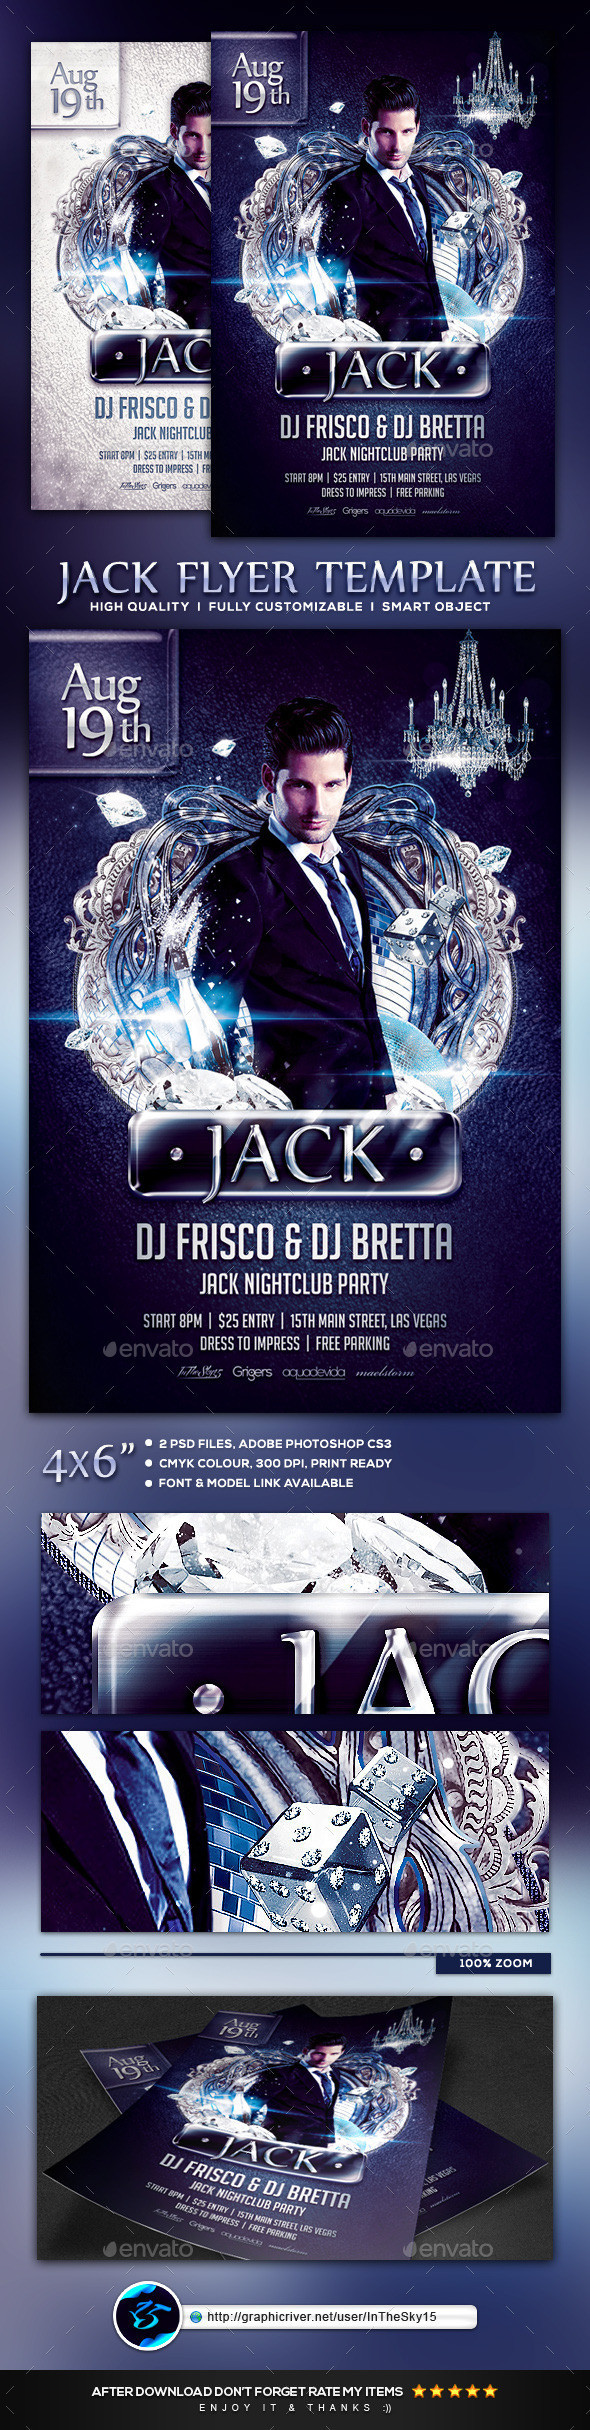 Preview 20jack 20flyer 20template 20